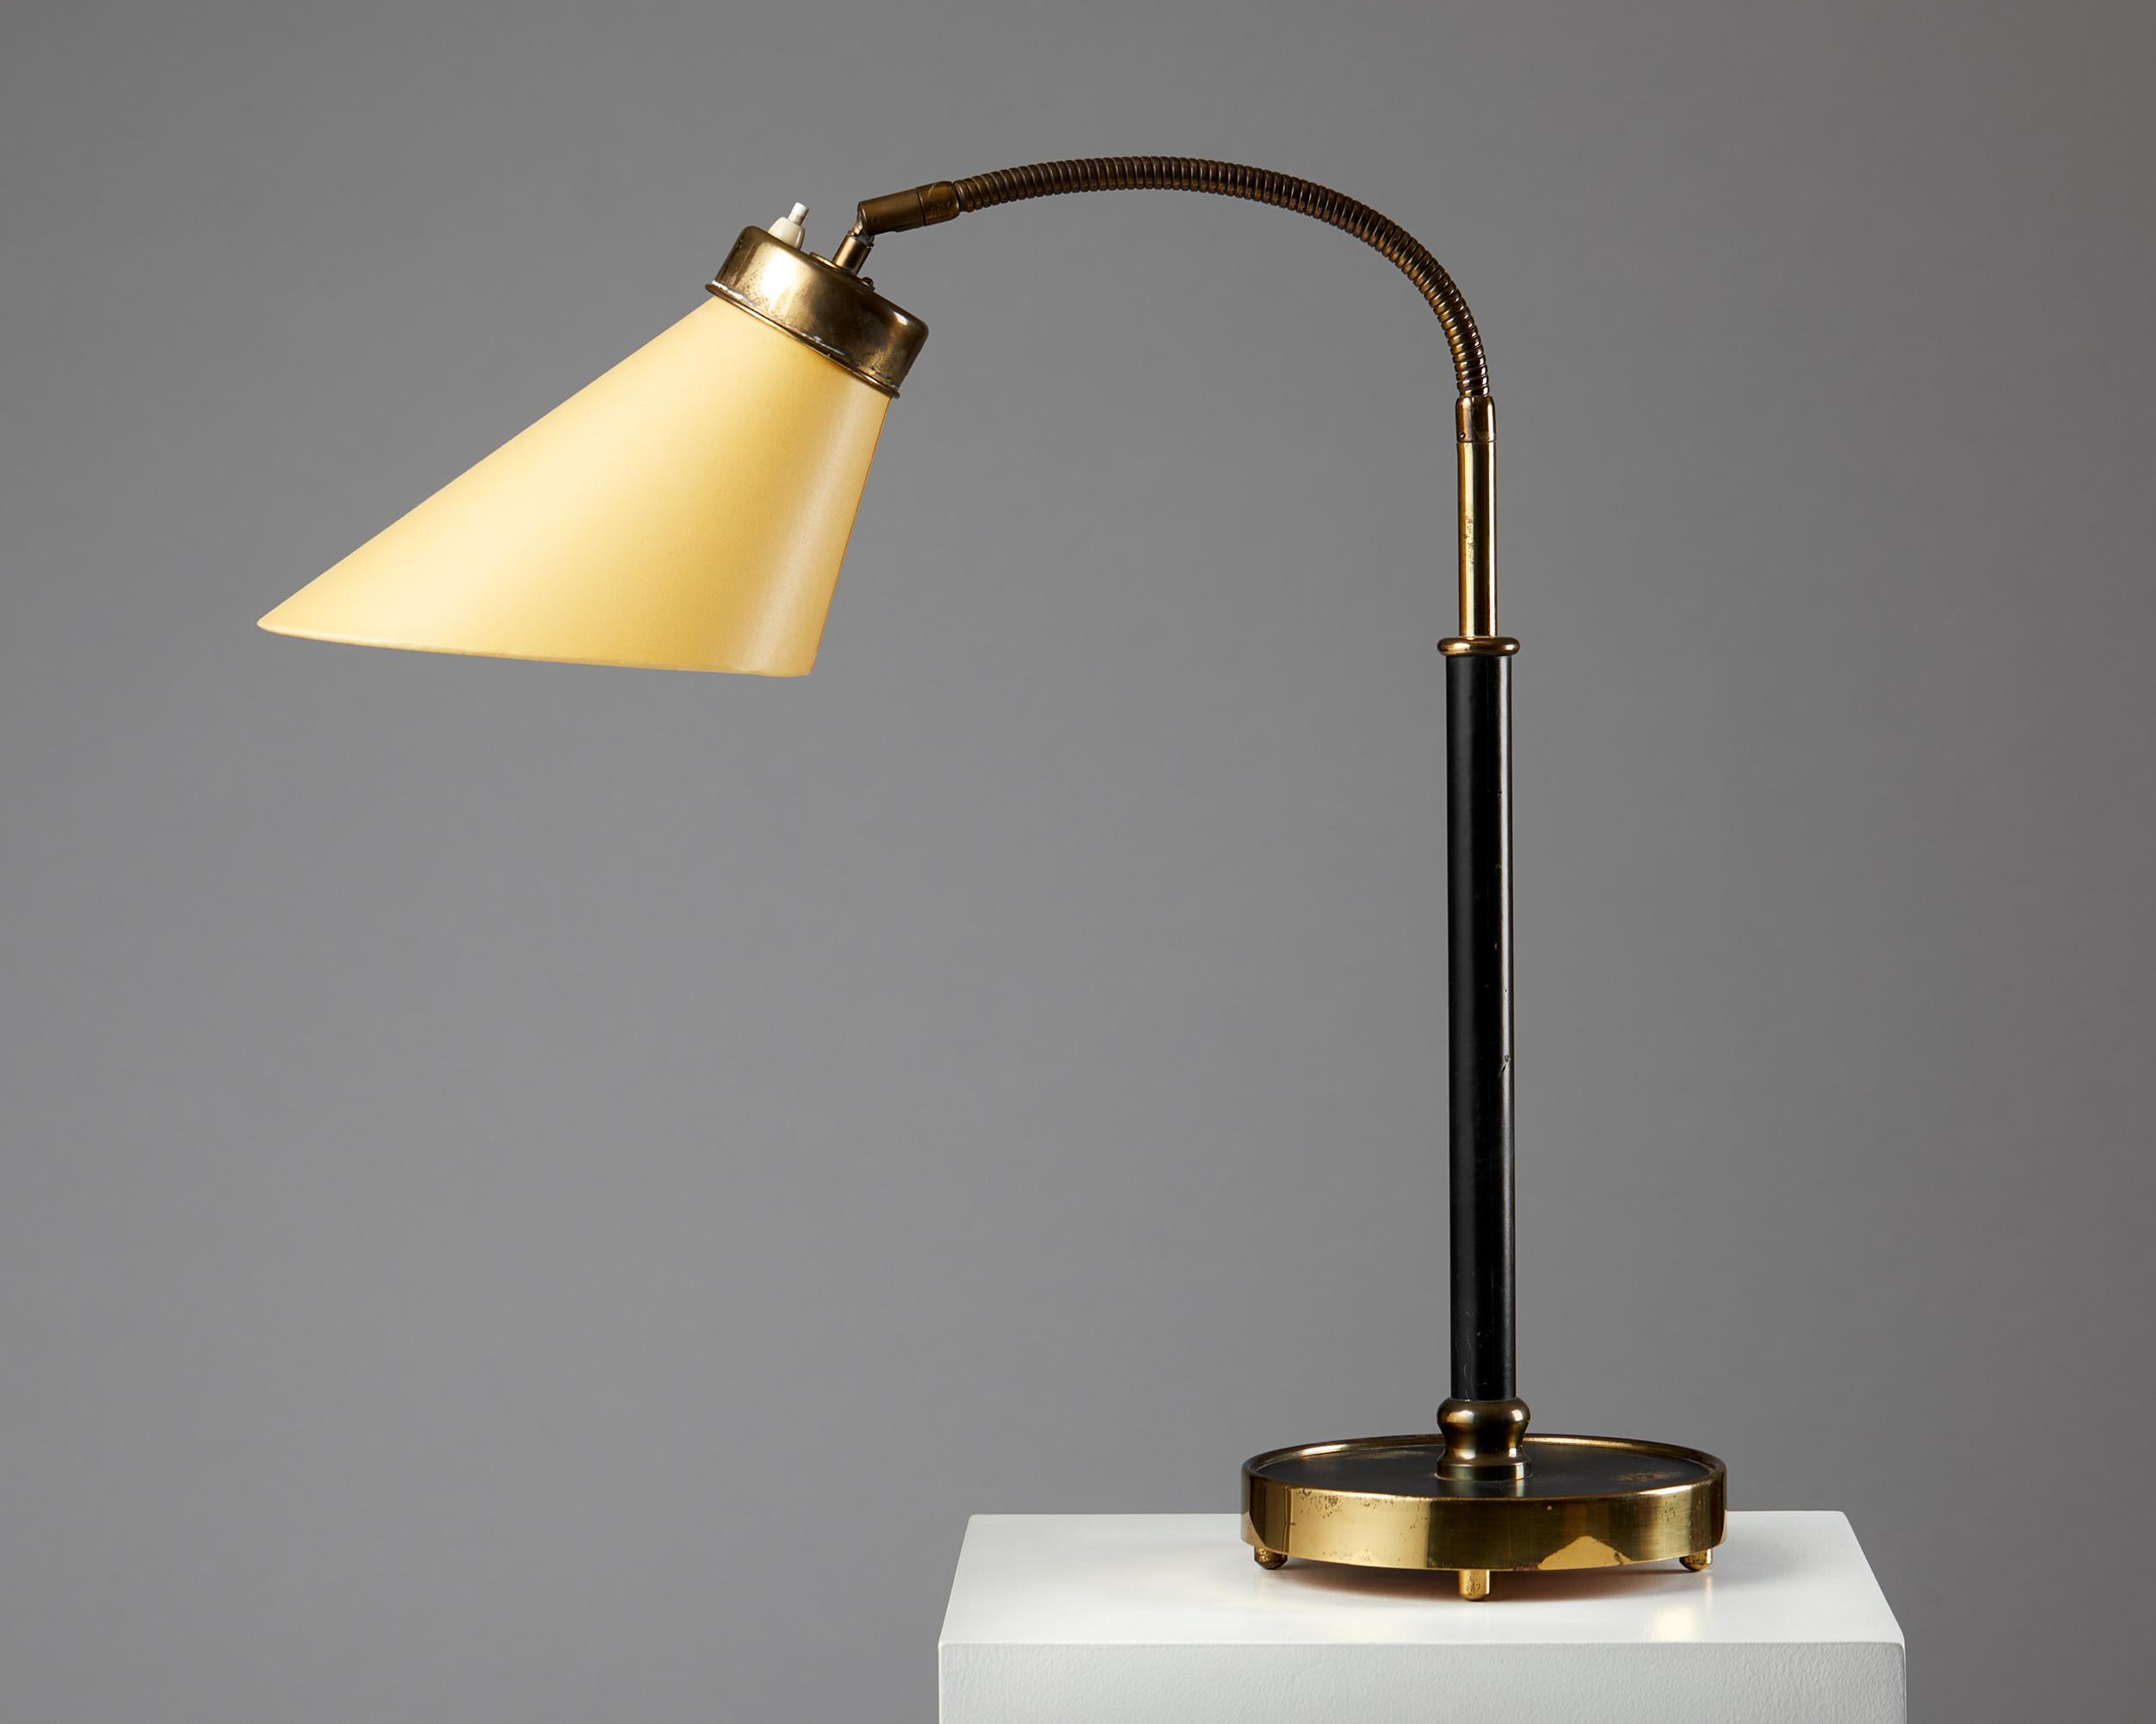 Table lamp model 2434 designed by Josef Frank for Svenskt Tenn,
Sweden, 1939.

Early model.

Leather and brass with fabric shade.

Measures: 
H: 61 cm
W: 21 cm
D: 62 cm

Josef Frank was a true European, he was also a pioneer of what would become